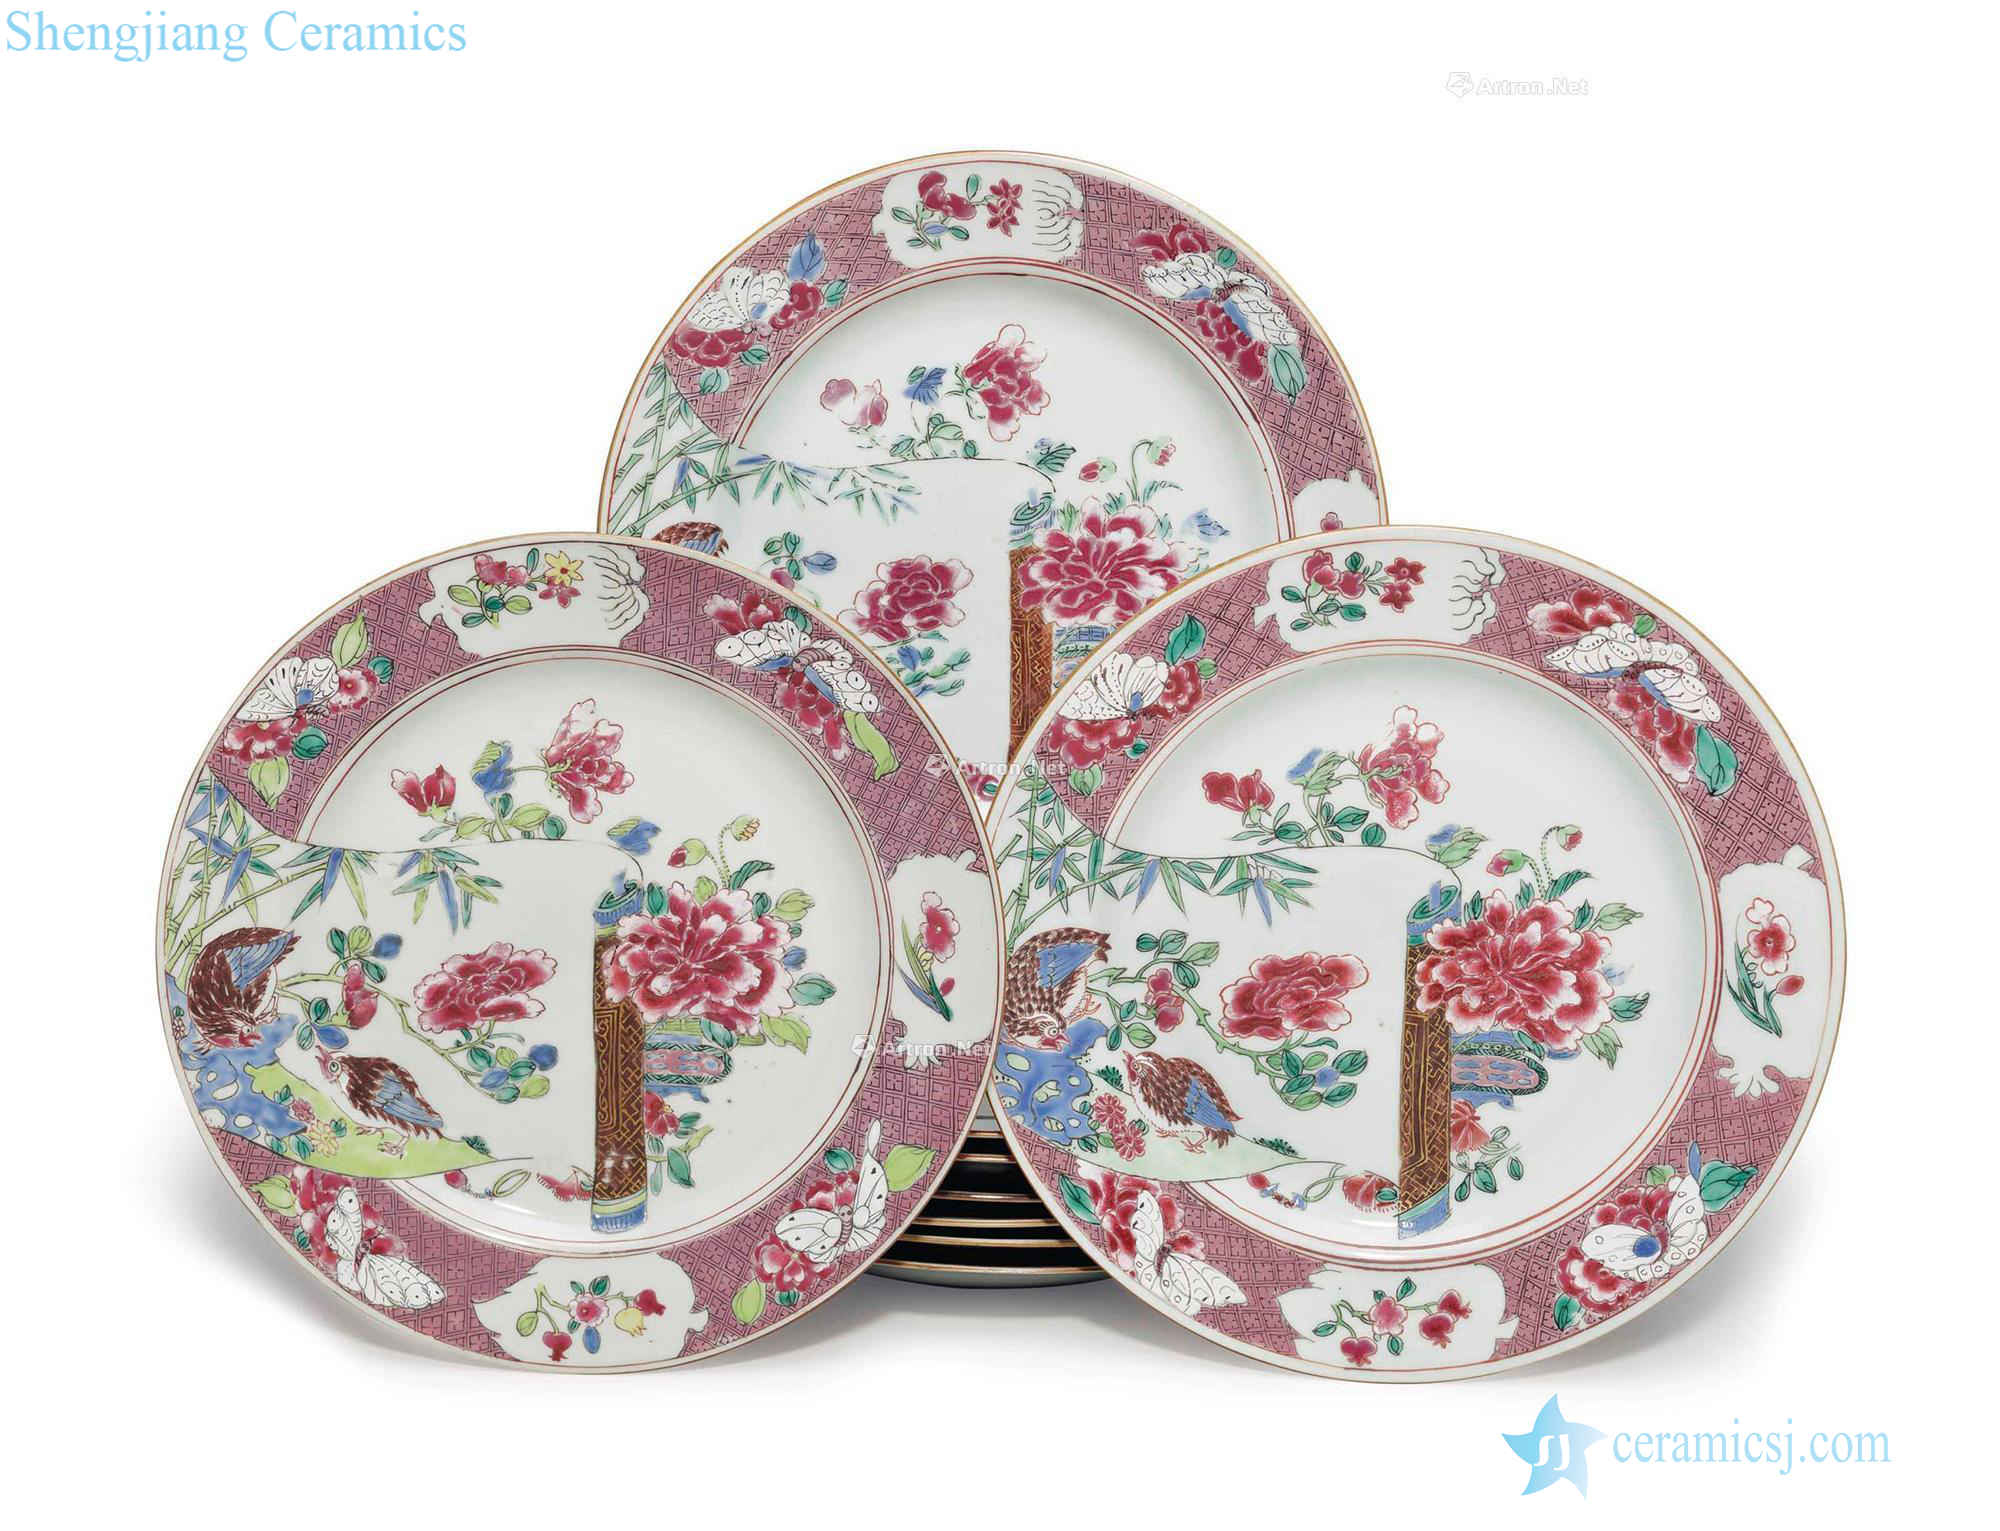 The qianlong period, 1735-96 - A SET OF TEN FAMILLE ROSE PLATES